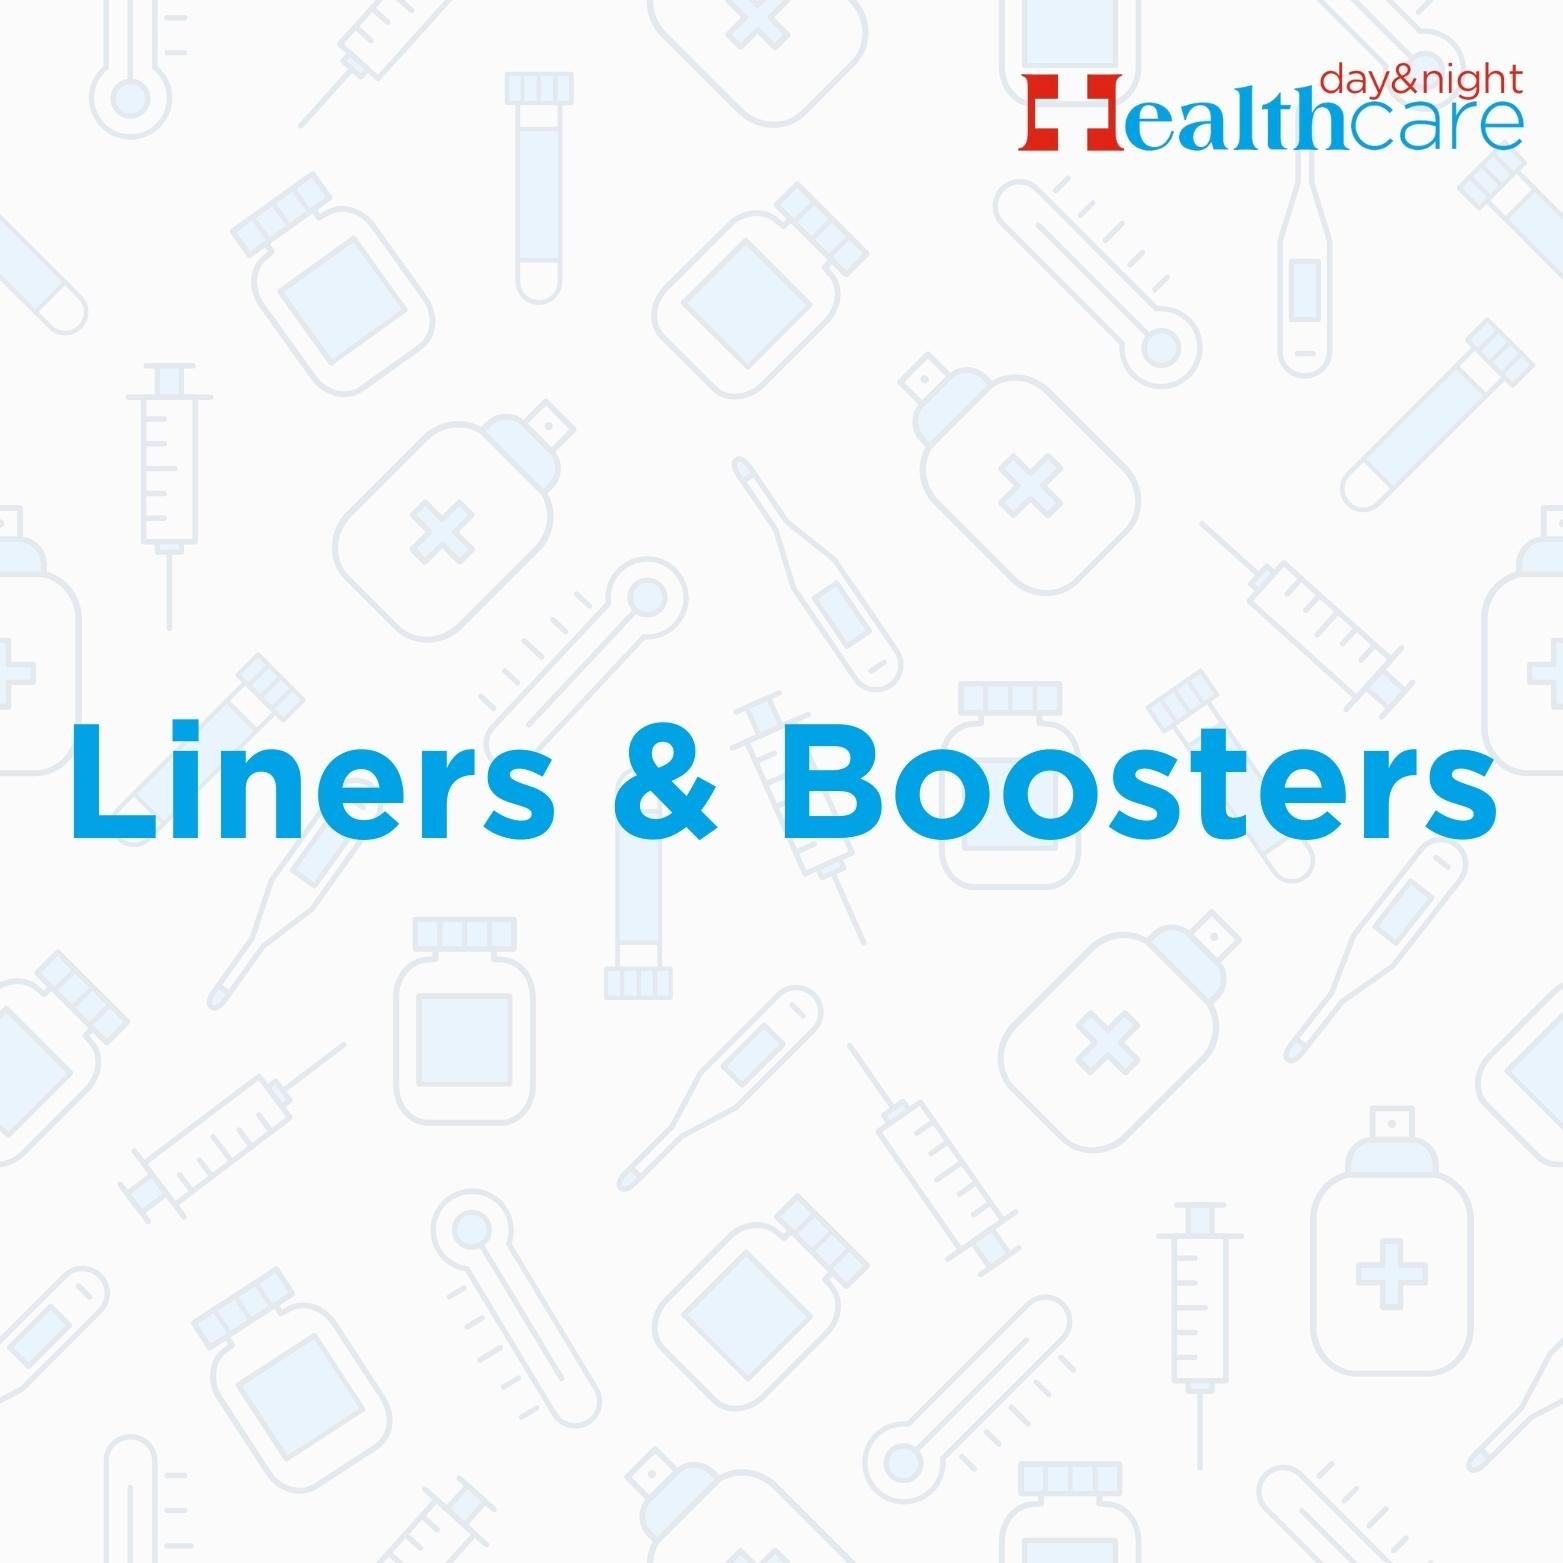 Liners & Boosters